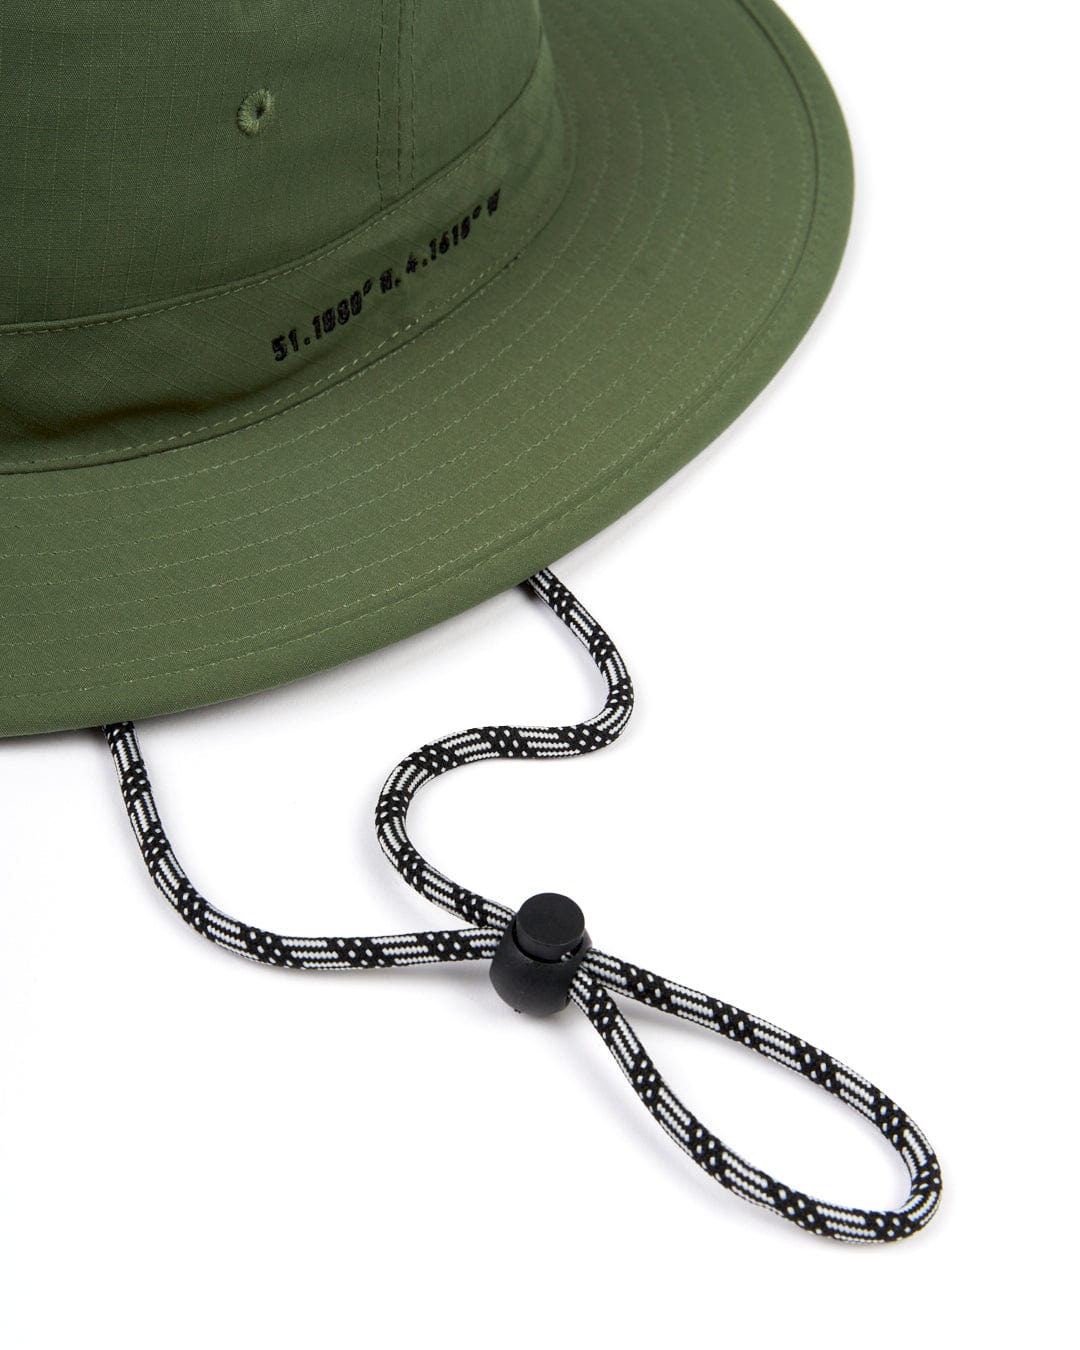 A Saltrock green gaitor with an adjustable drawstring chin strap attached.